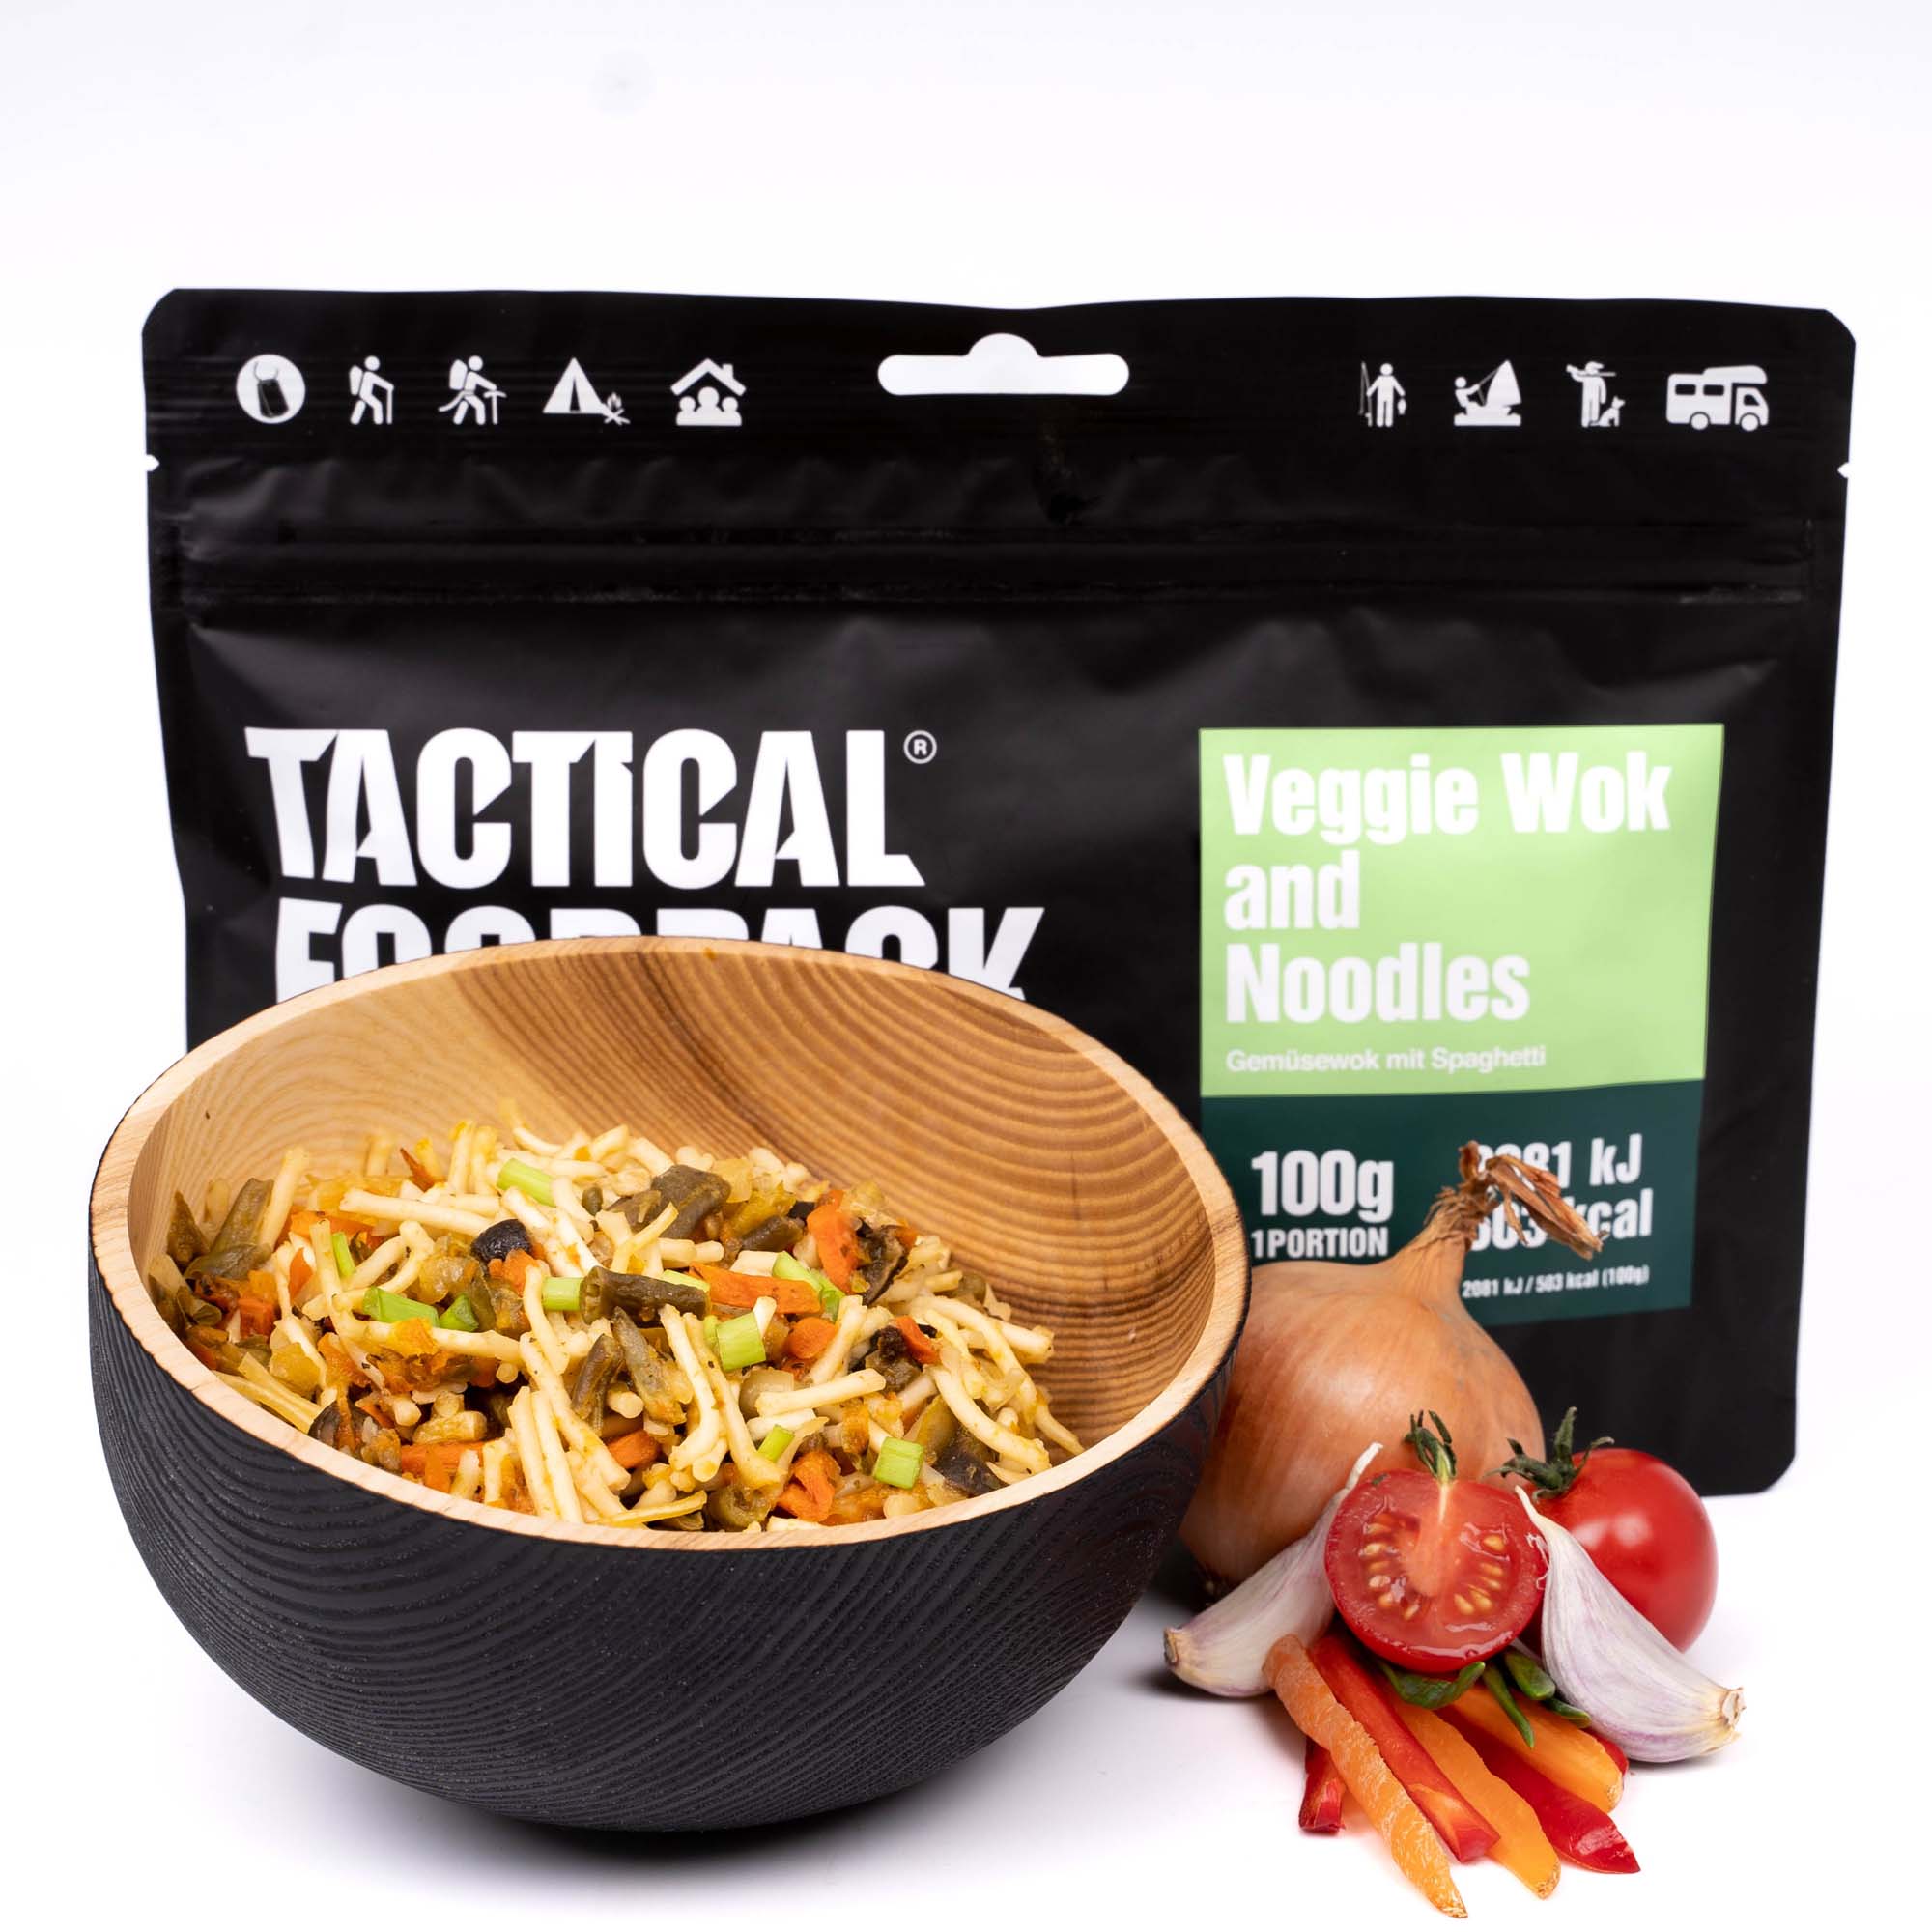 Tactical Foodpack | Veggie Wok and Noodles 100g